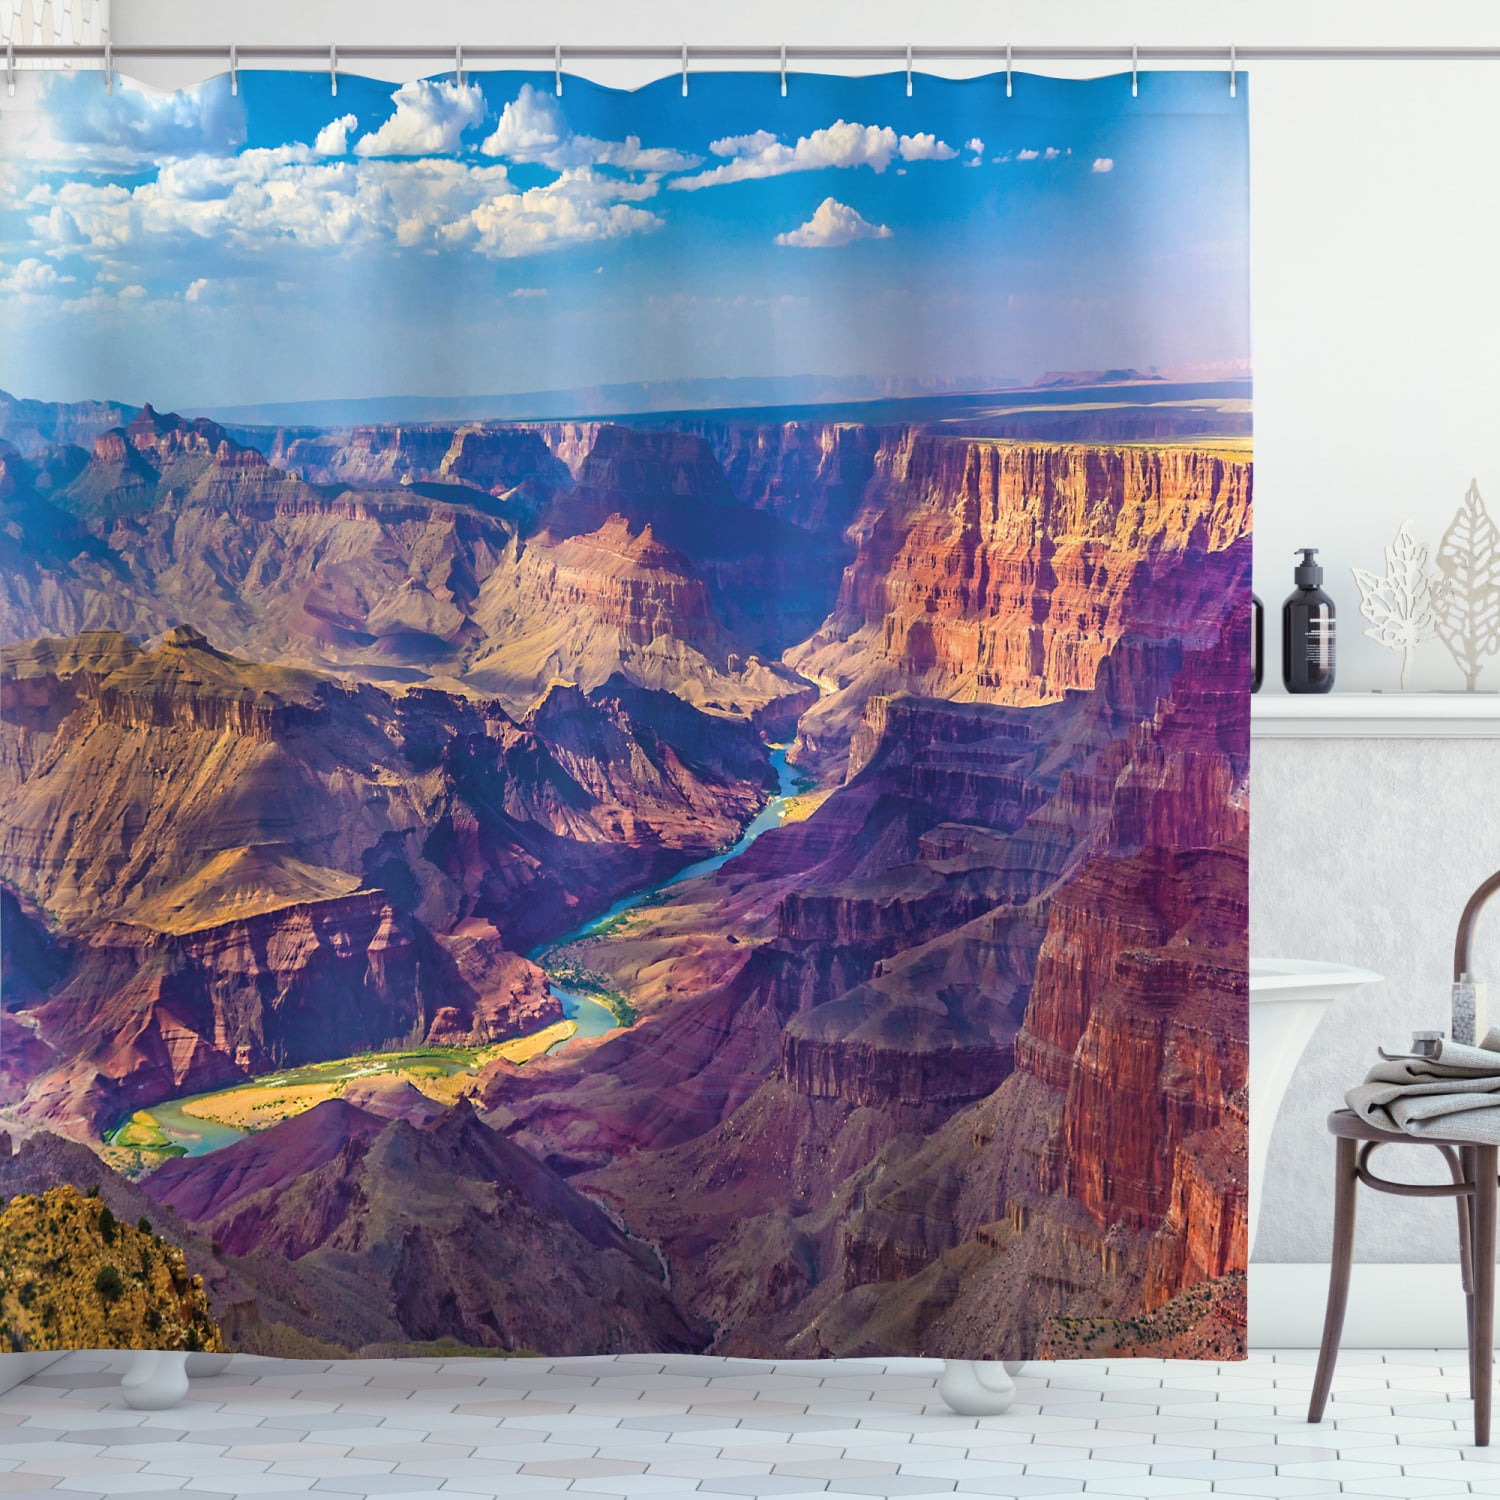 Canyon Shower Curtain Aerial View Of, Grand Canyon Shower Curtain